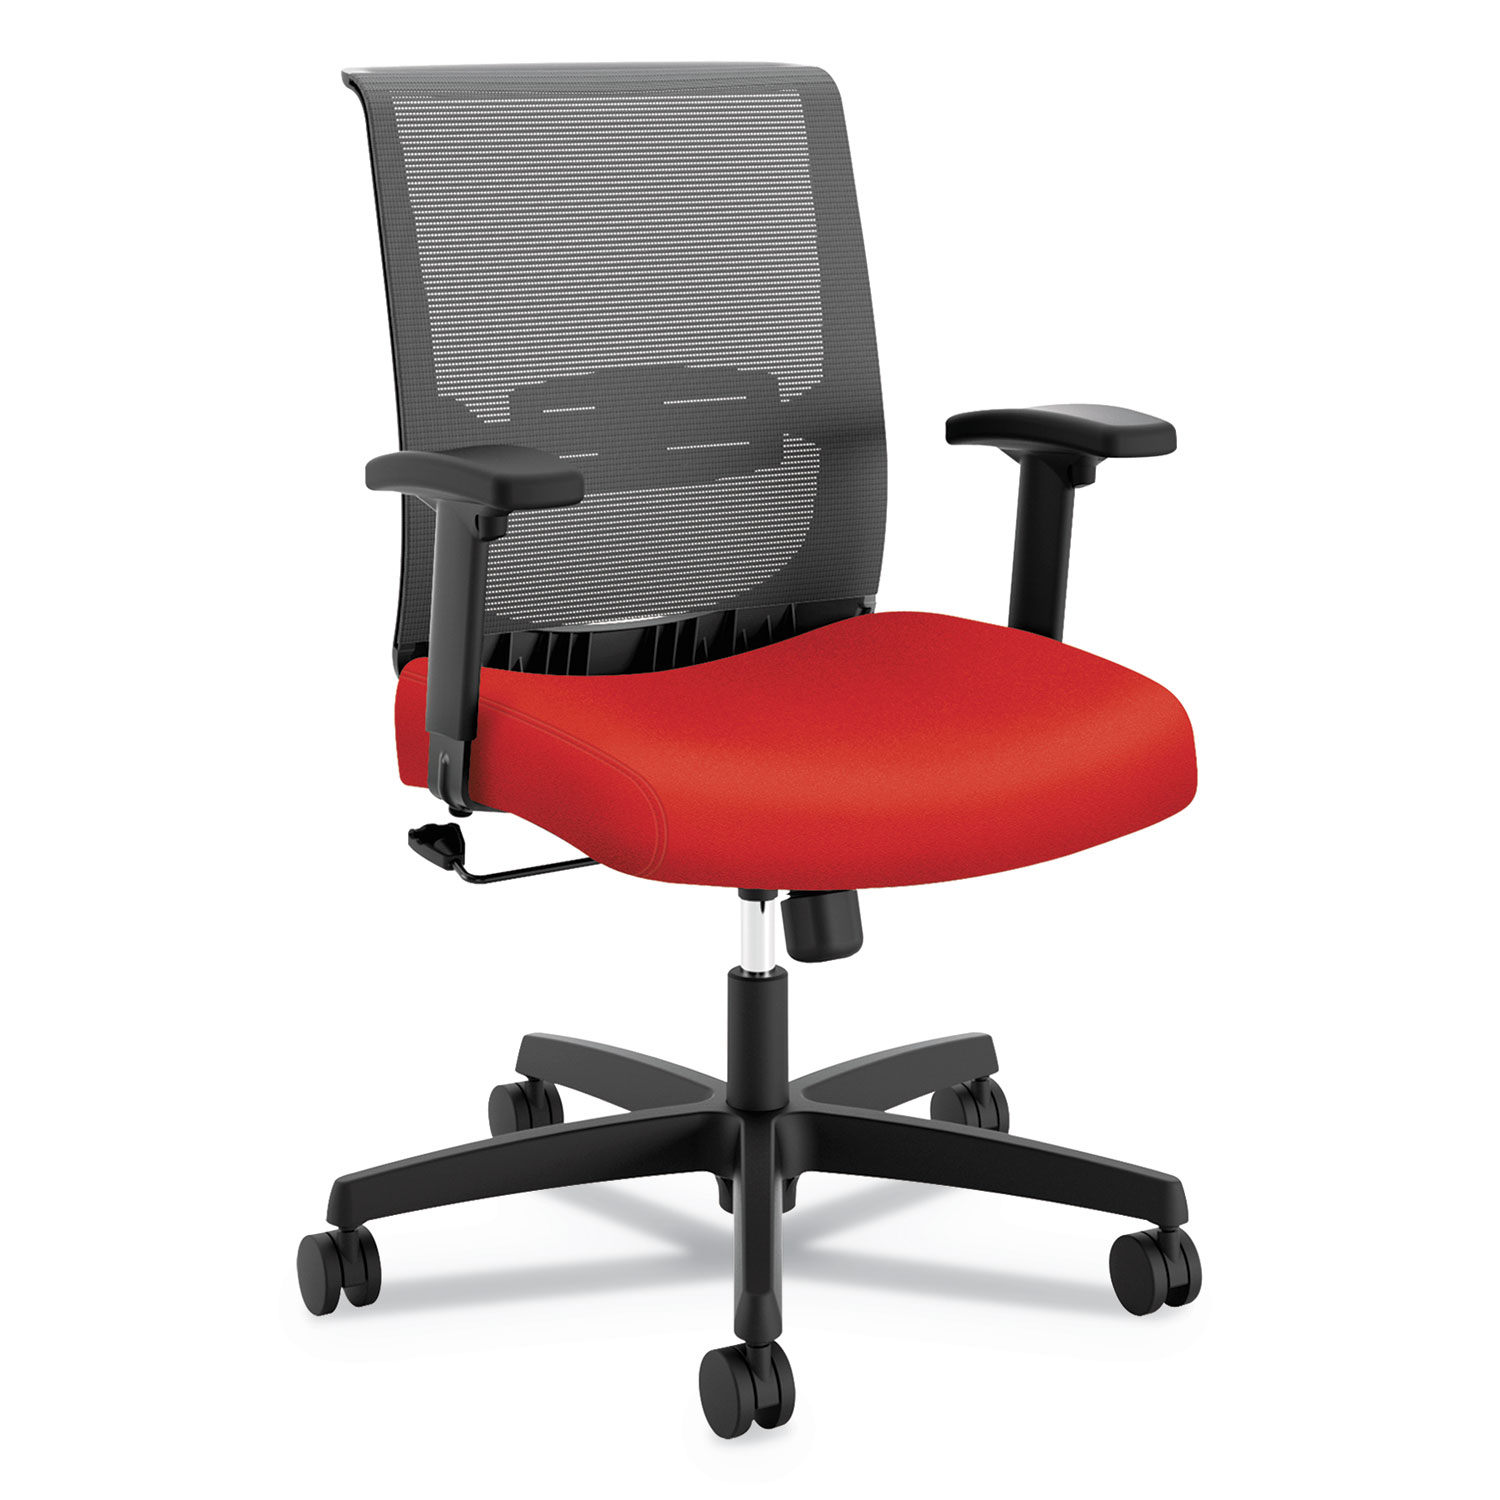  HON HONCMZ1ACU67 Convergence Mid-Back Task Chair with Swivel-Tilt Control, Supports up to 275 lbs, Red Seat, Black Back, Black Base (HONCMZ1ACU67) 